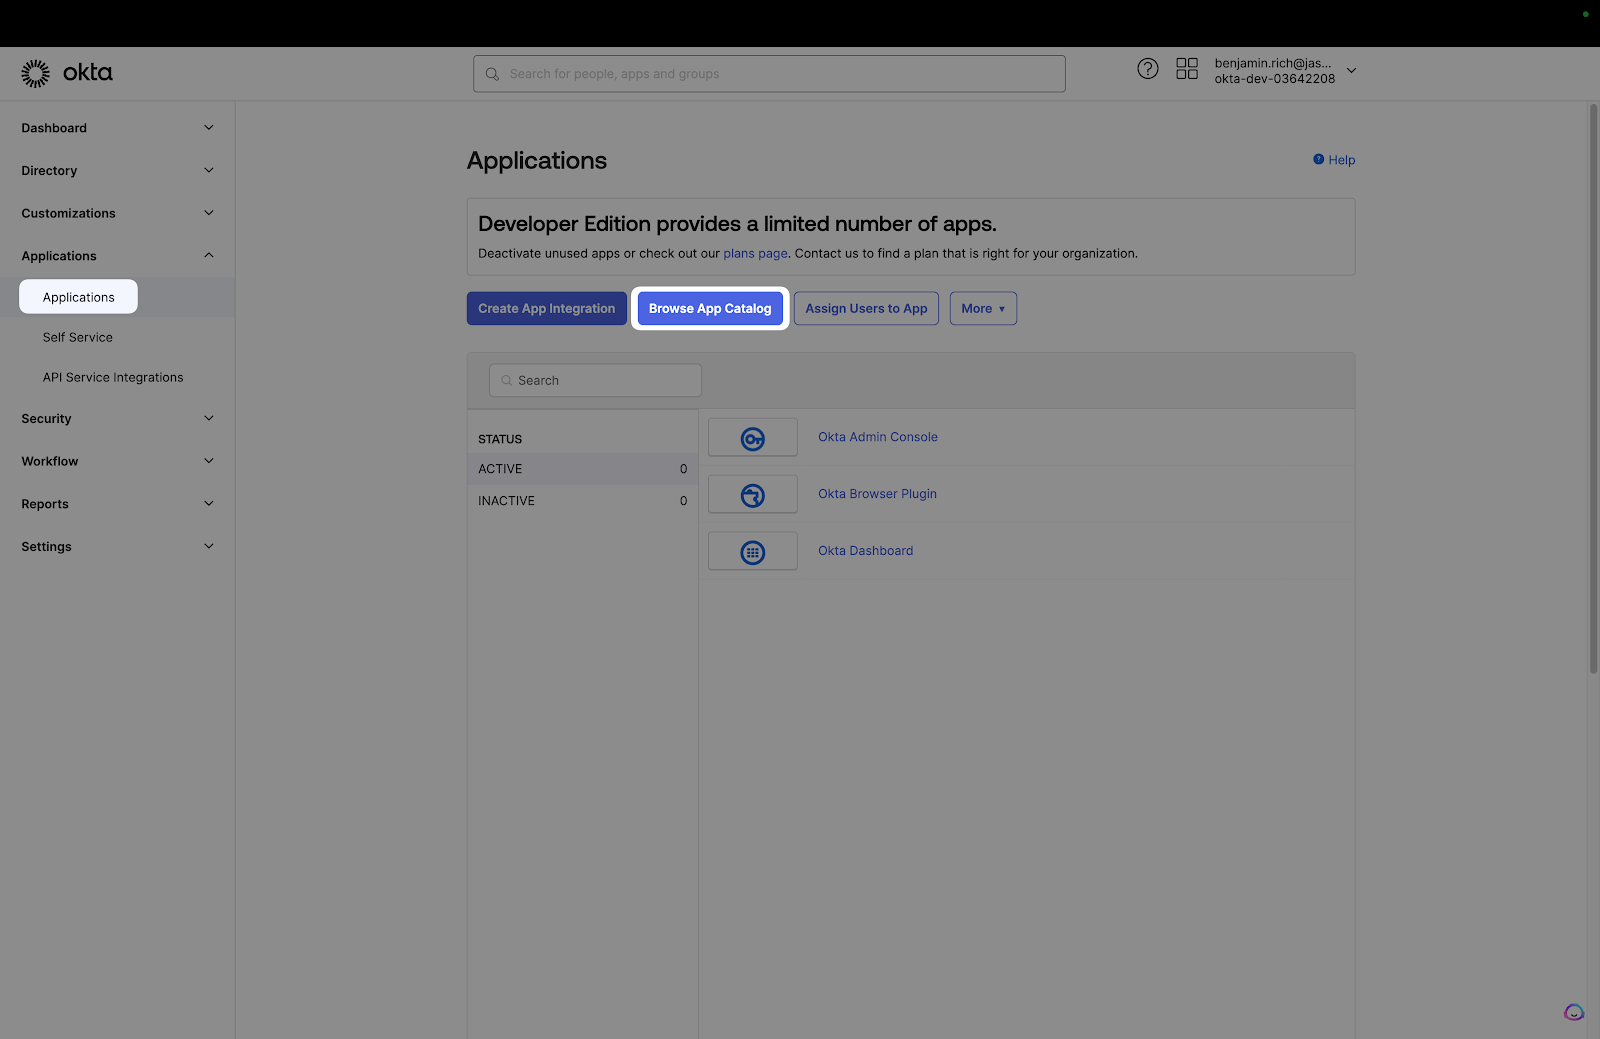 A screenshot showing where to select 'Applications' and 'Browse App Catalog' in the Okta dashboard.